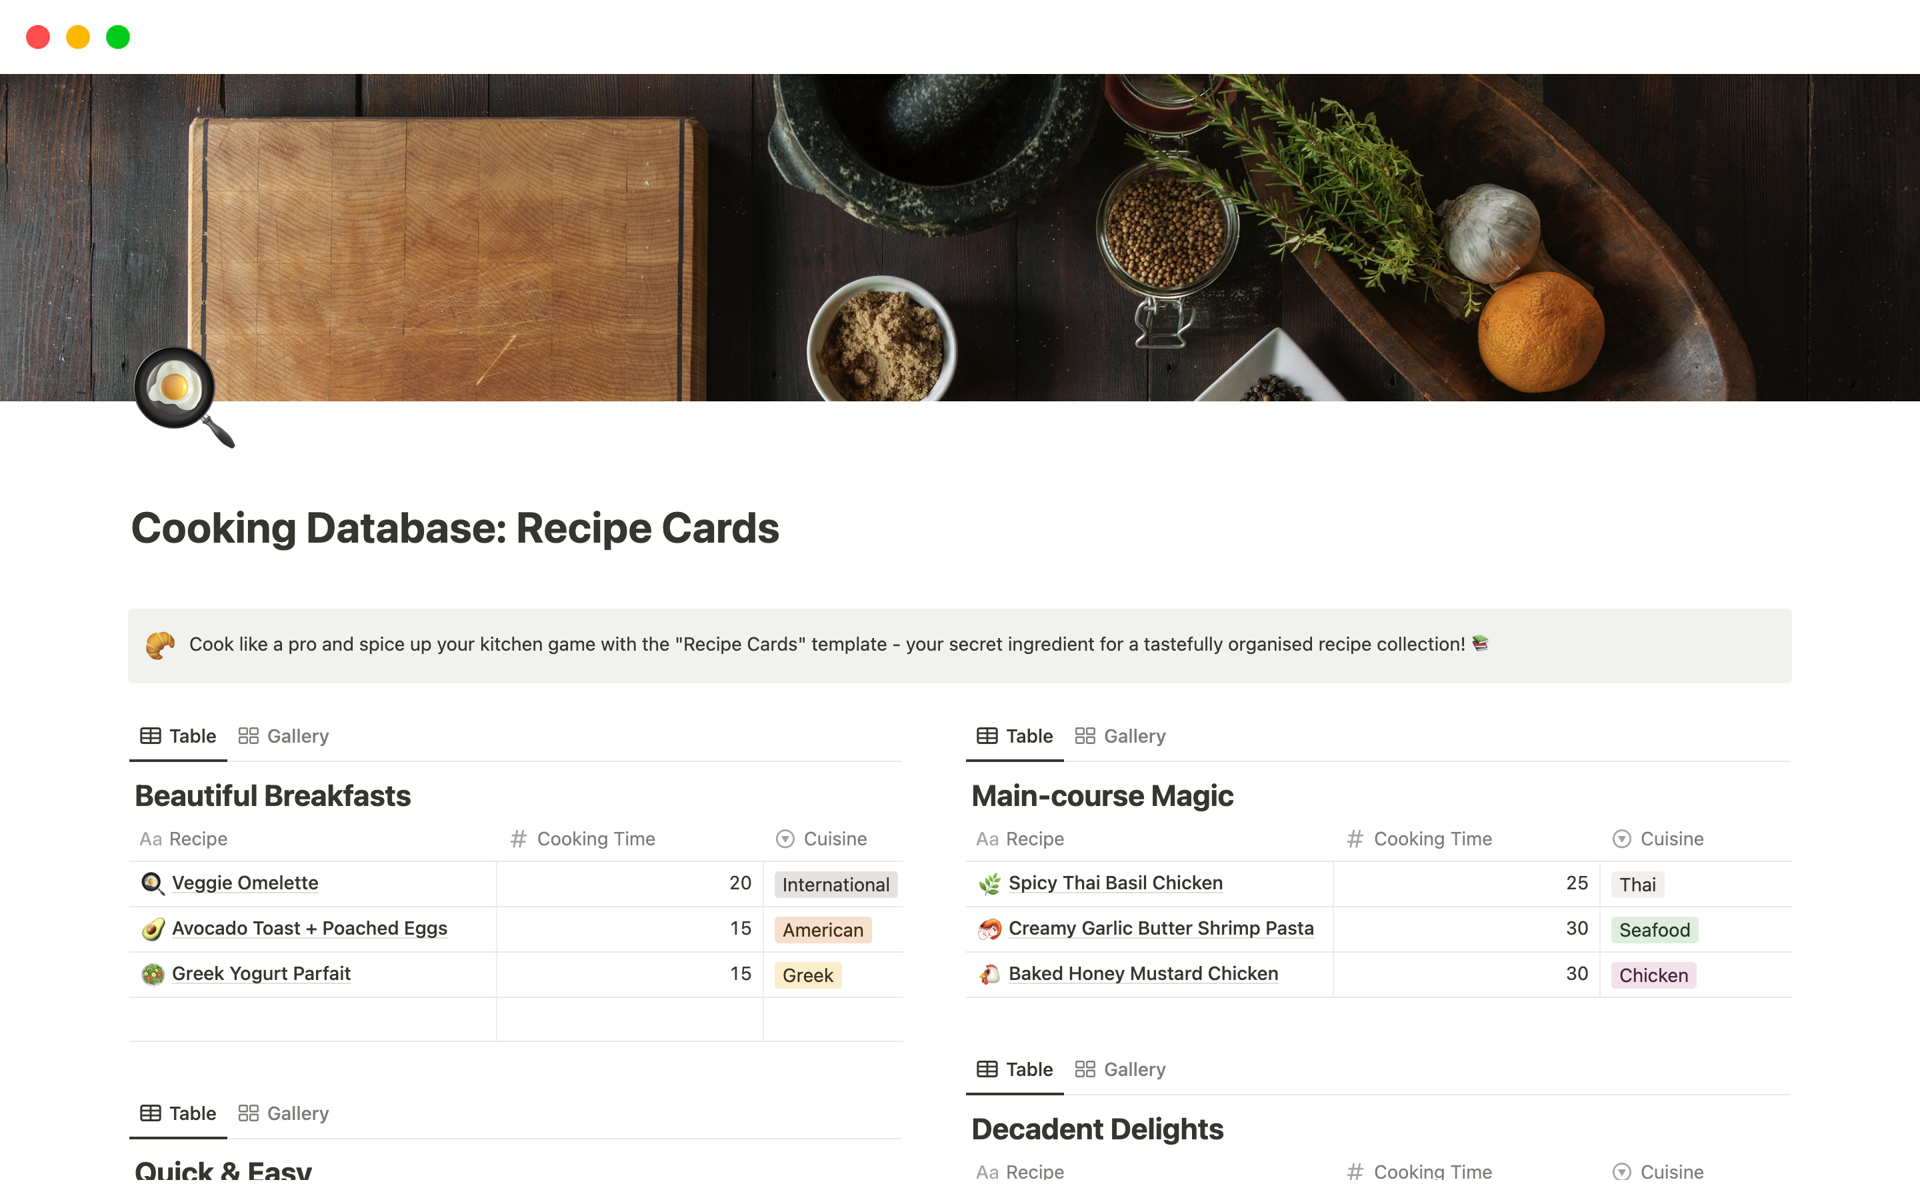 Cook like a pro with the "Recipe Cards" template - your secret ingredient for a tastefully organized recipe collection, easily copy and add more categories, sort by cooking time, and explore cuisines from around the world! 📚🍽️